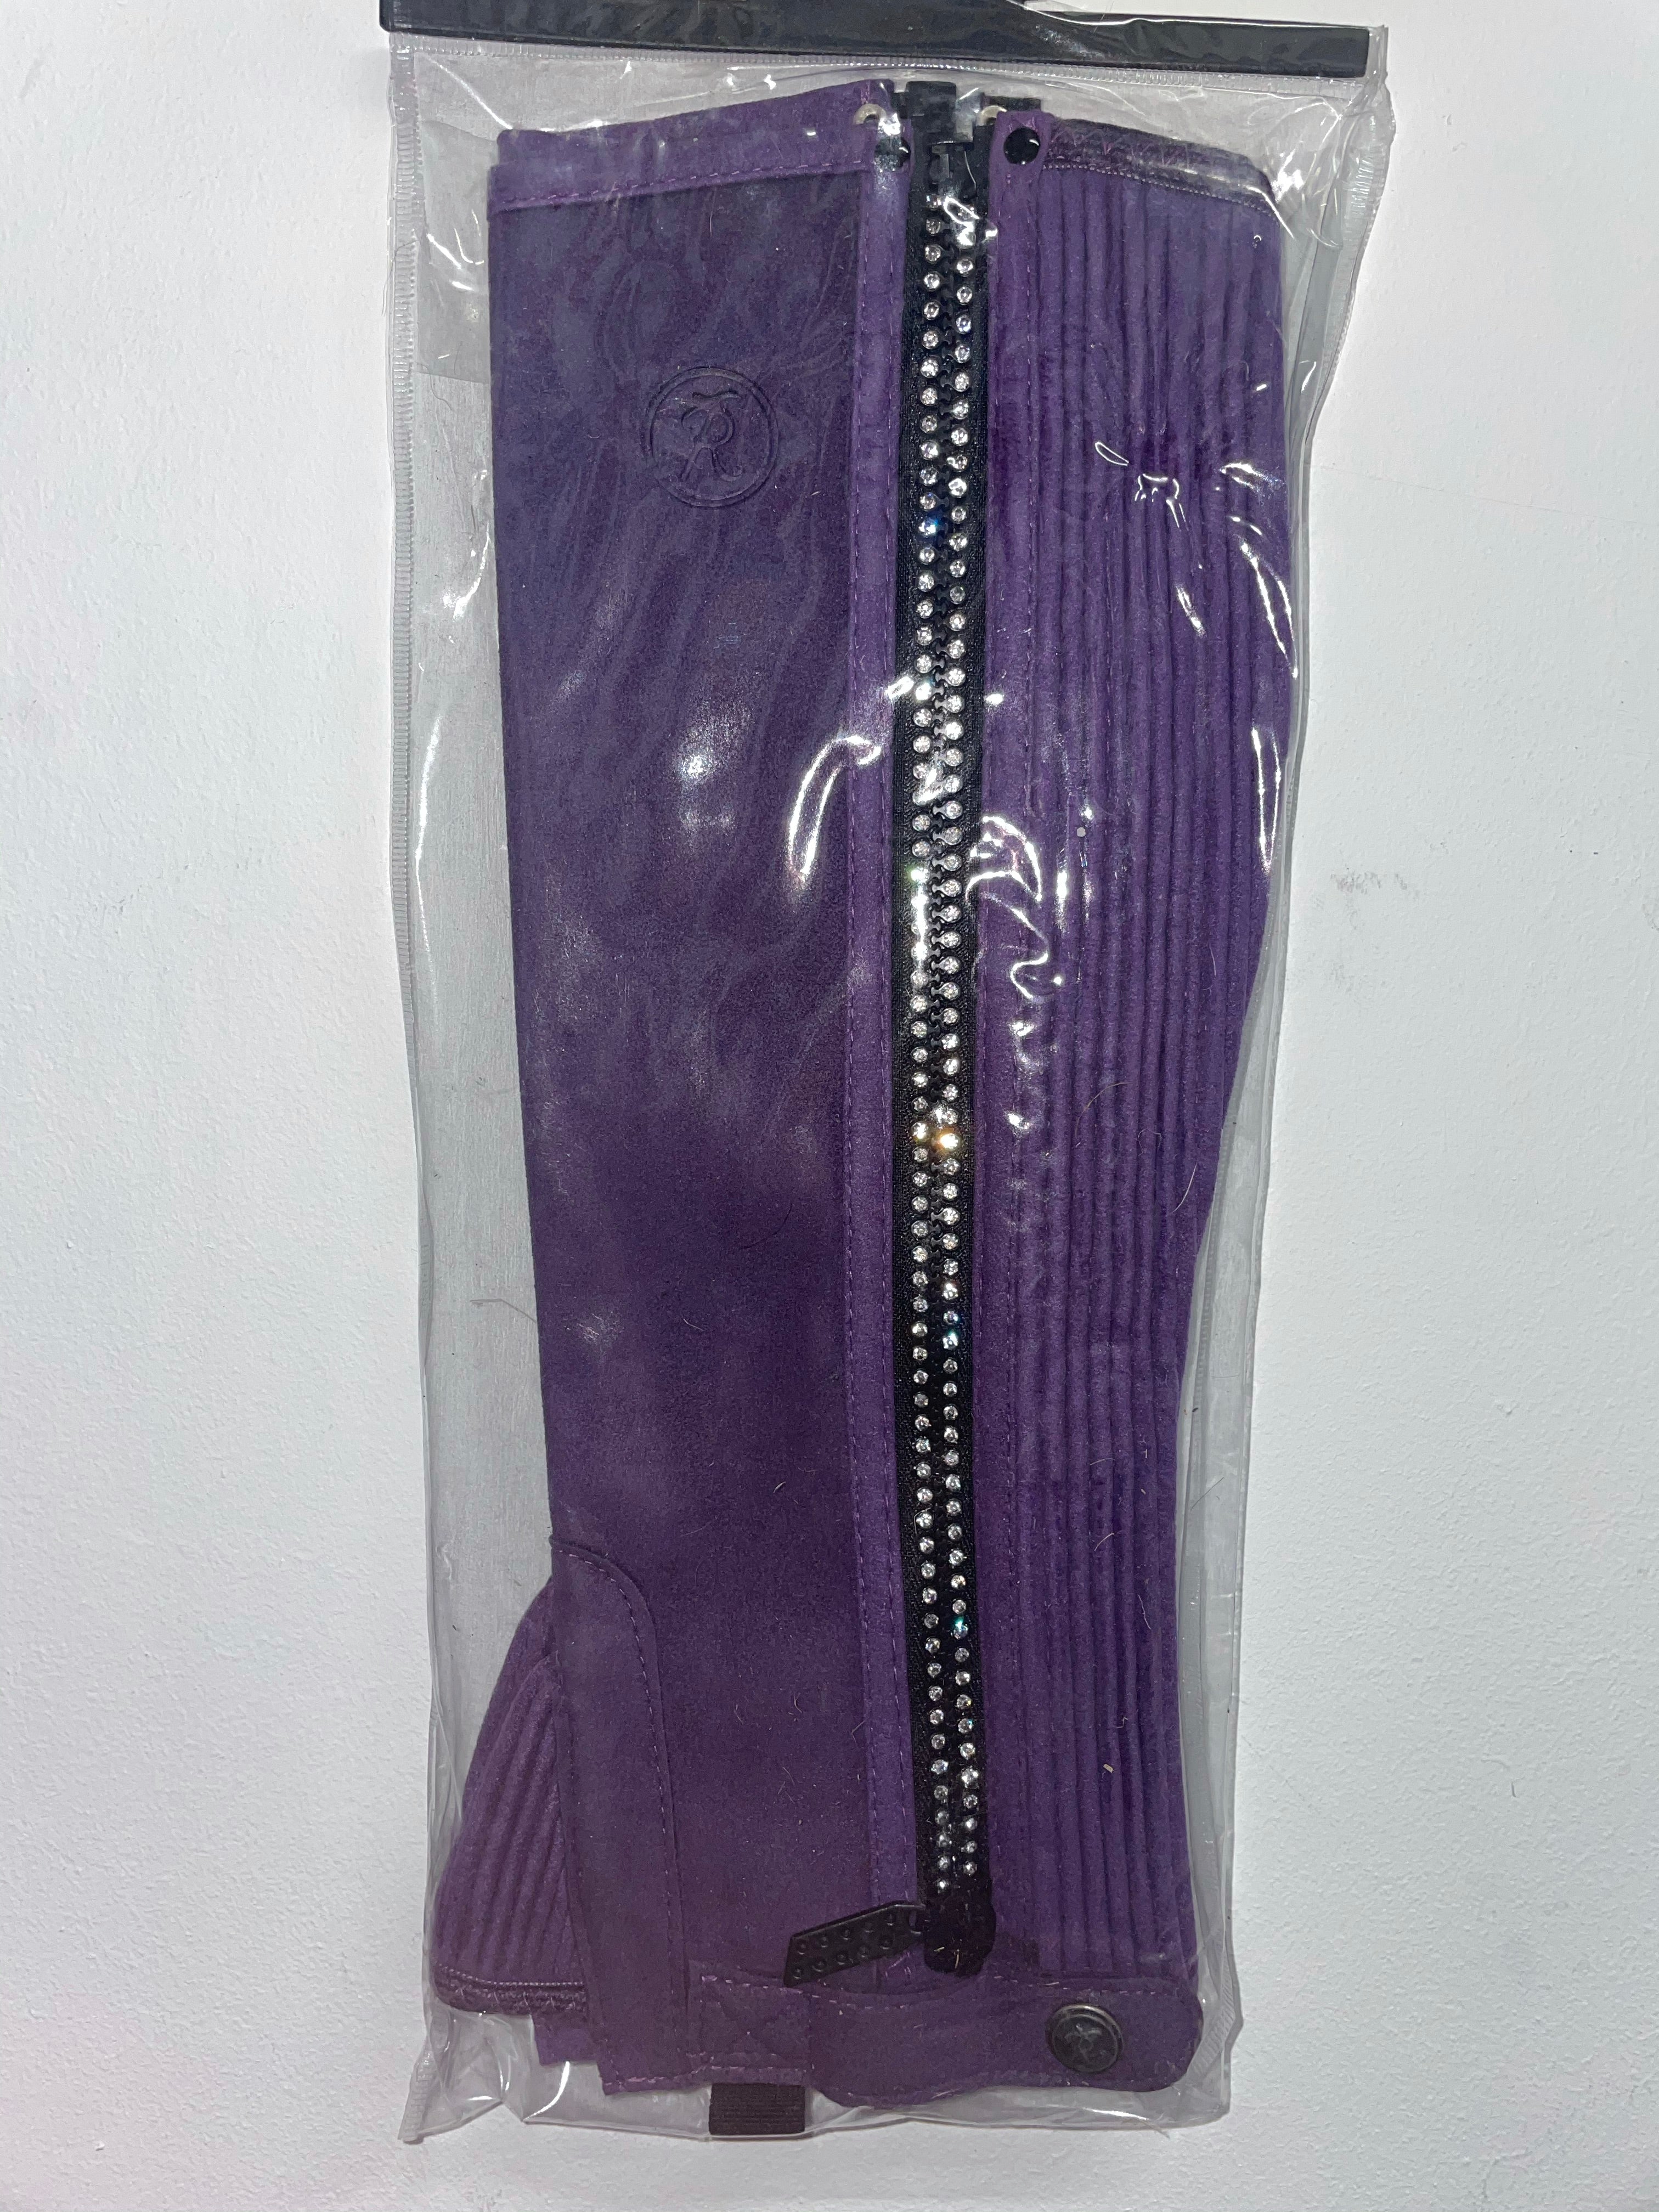 Bling Girls Half Chaps - Purple or Pink